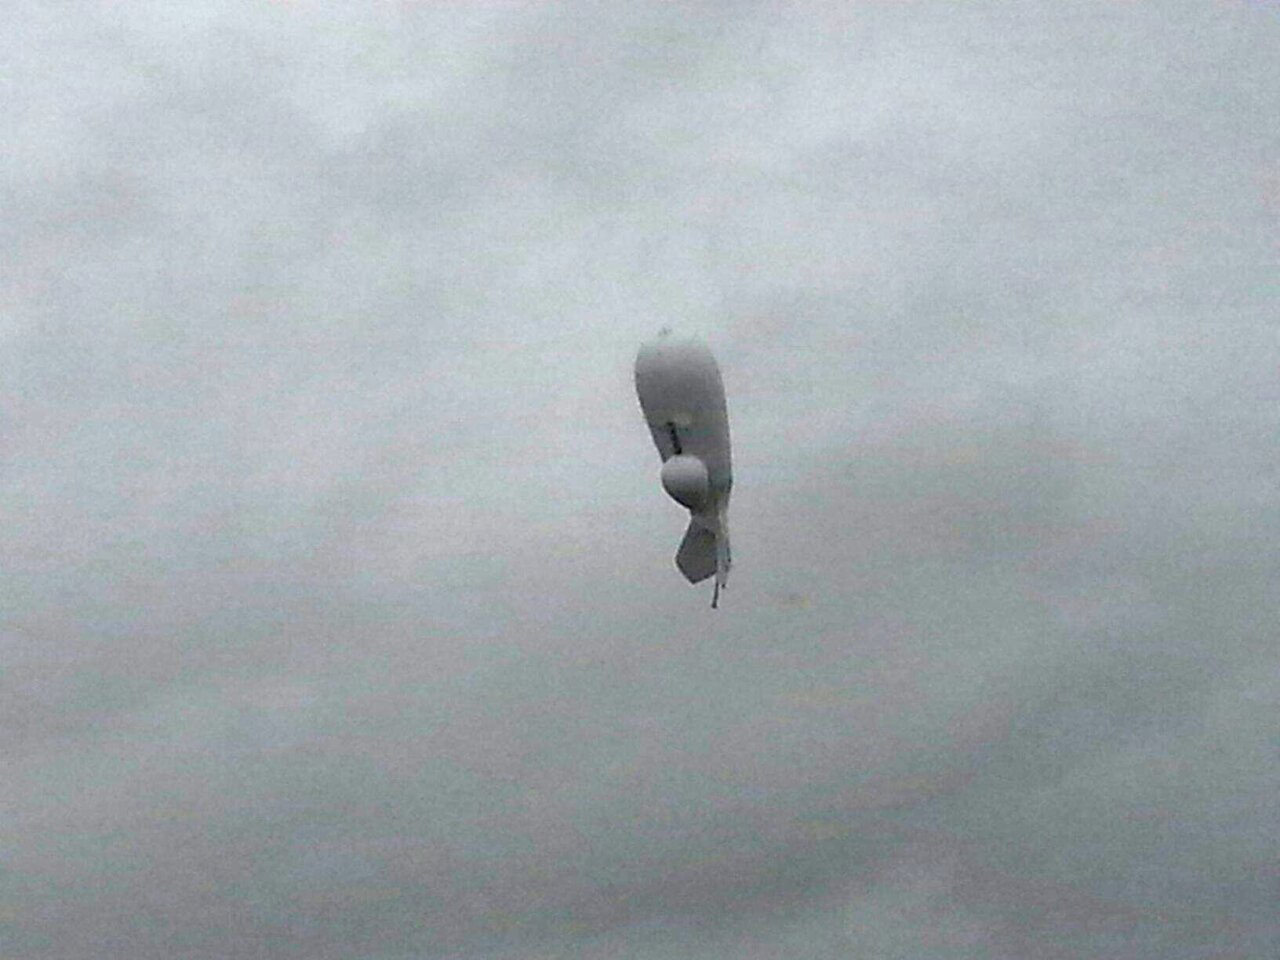 An untethered Army surveillance blimp floats over Bloomsburg, Pa., on Oct. 28.